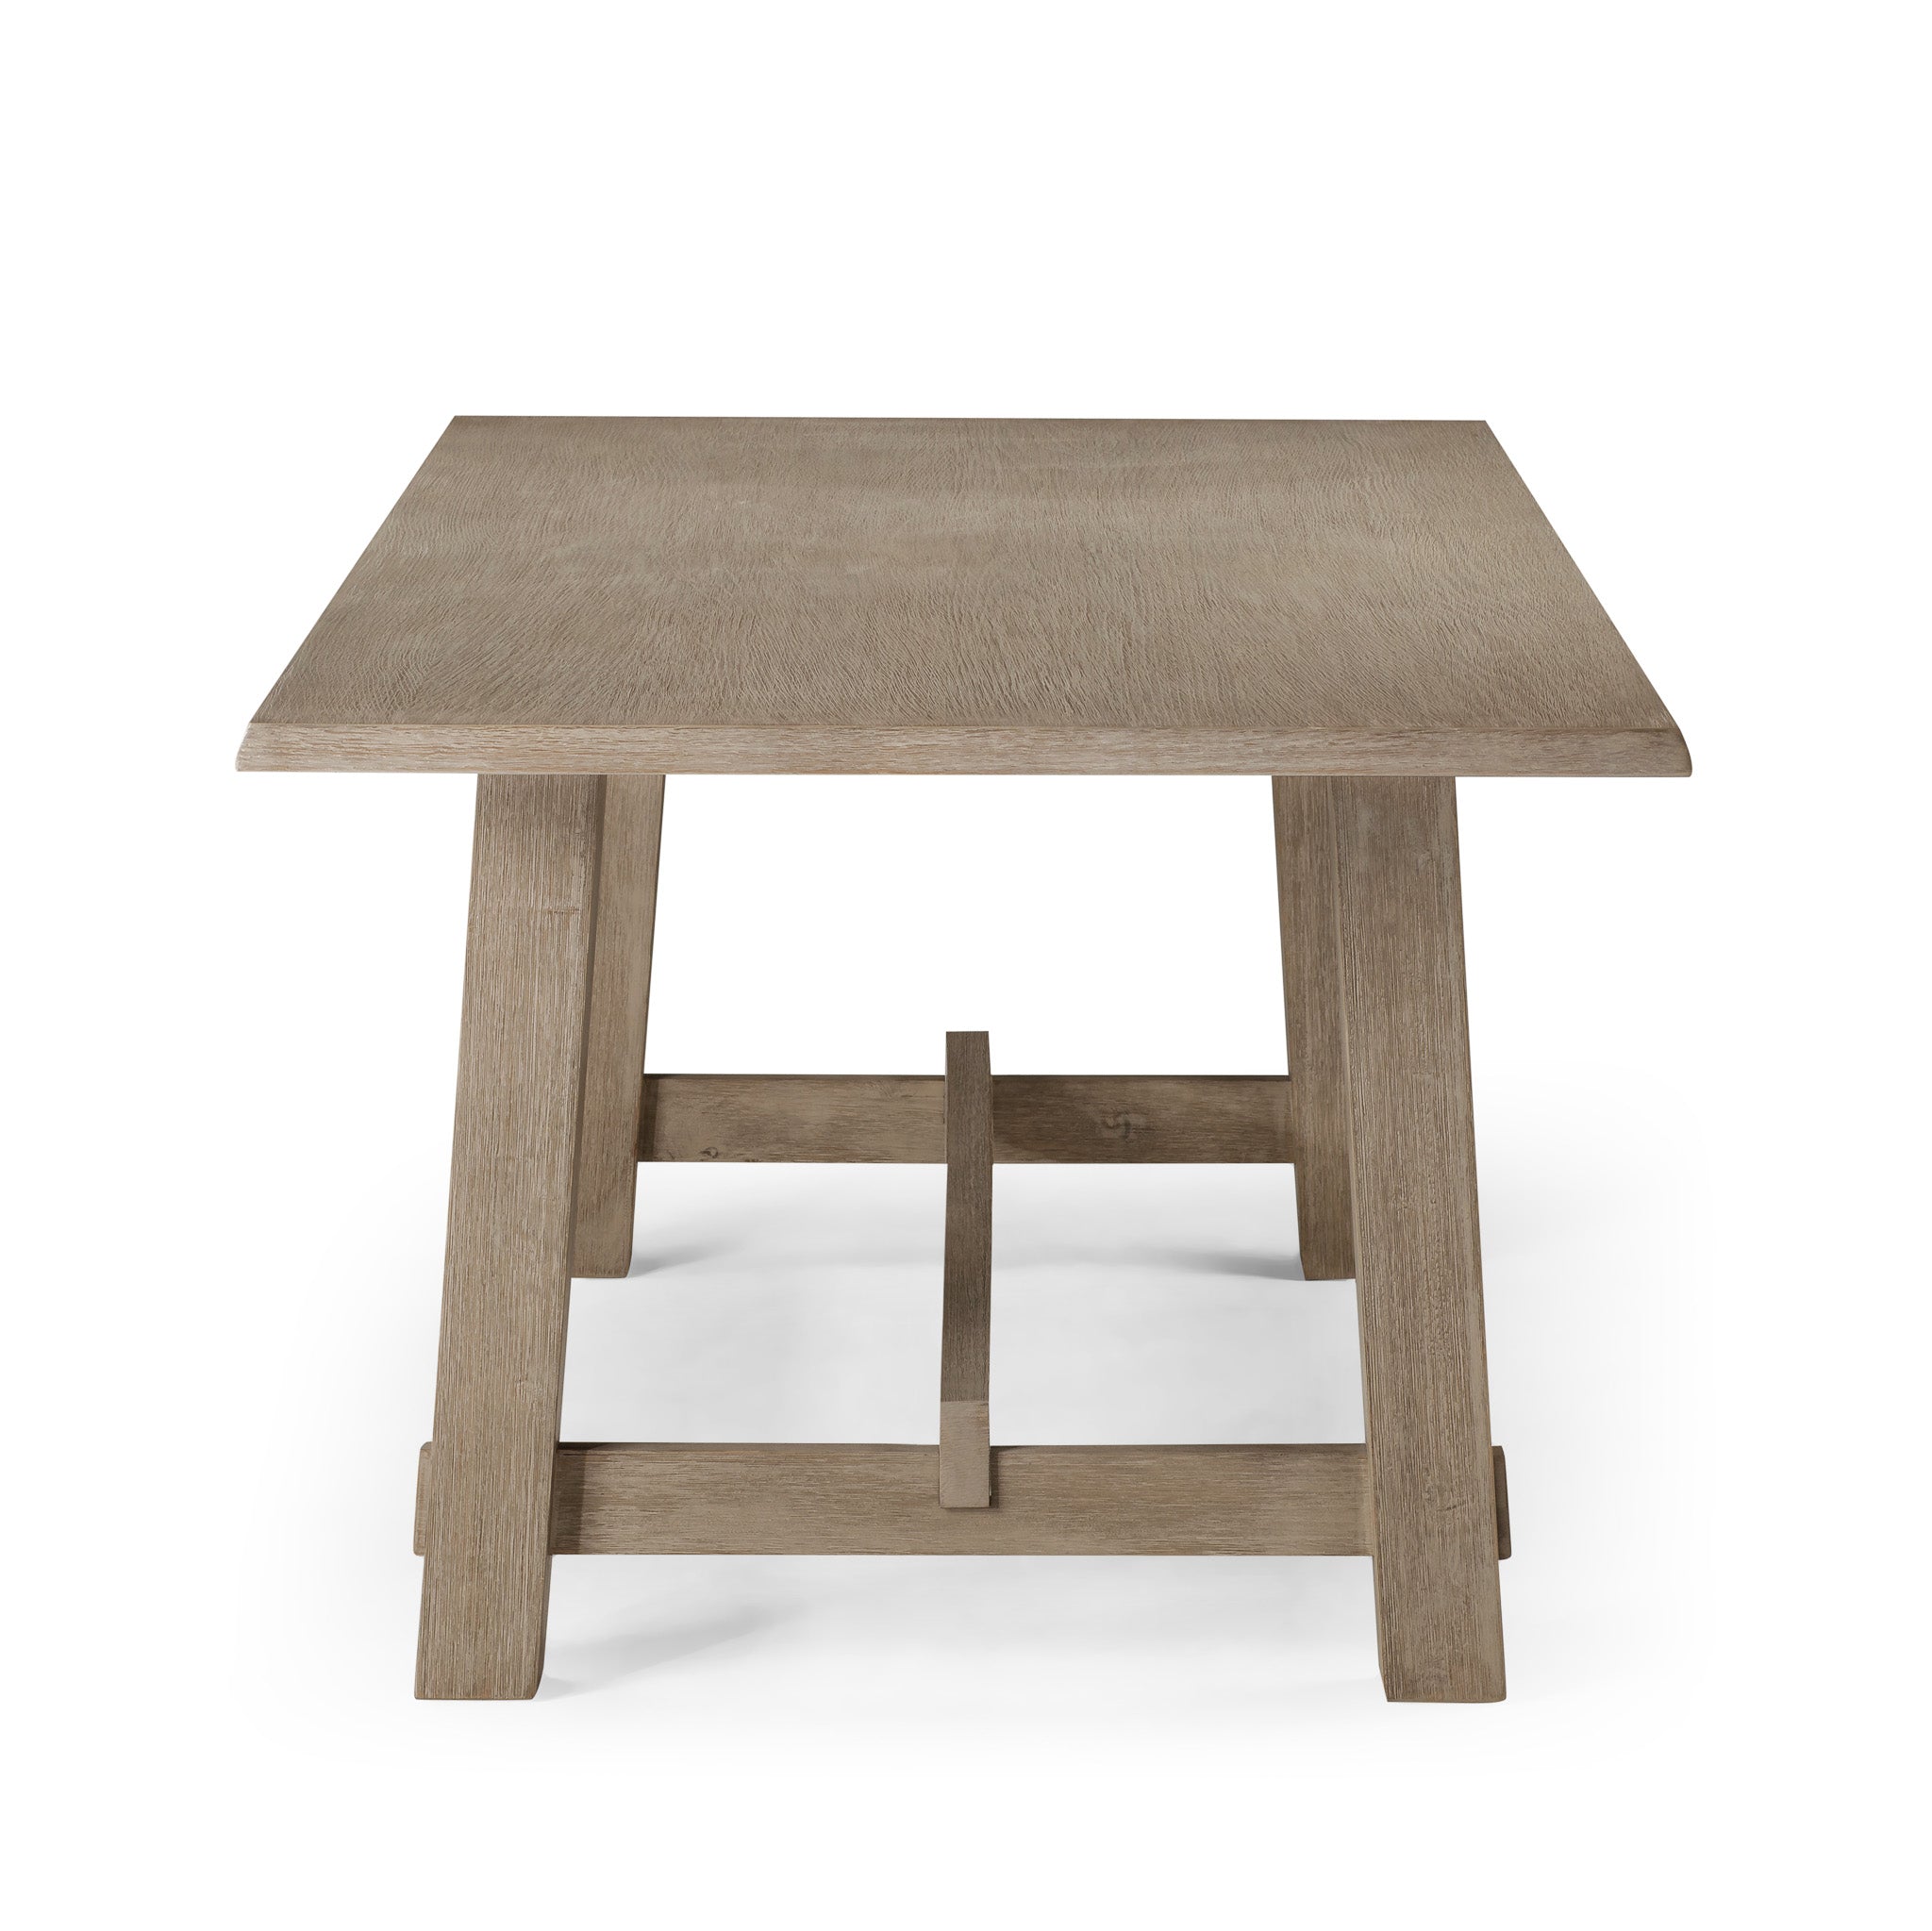 Yves Organic Rectangular Wooden Dining Table in Weathered Grey Finish in Dining Furniture by Maven Lane